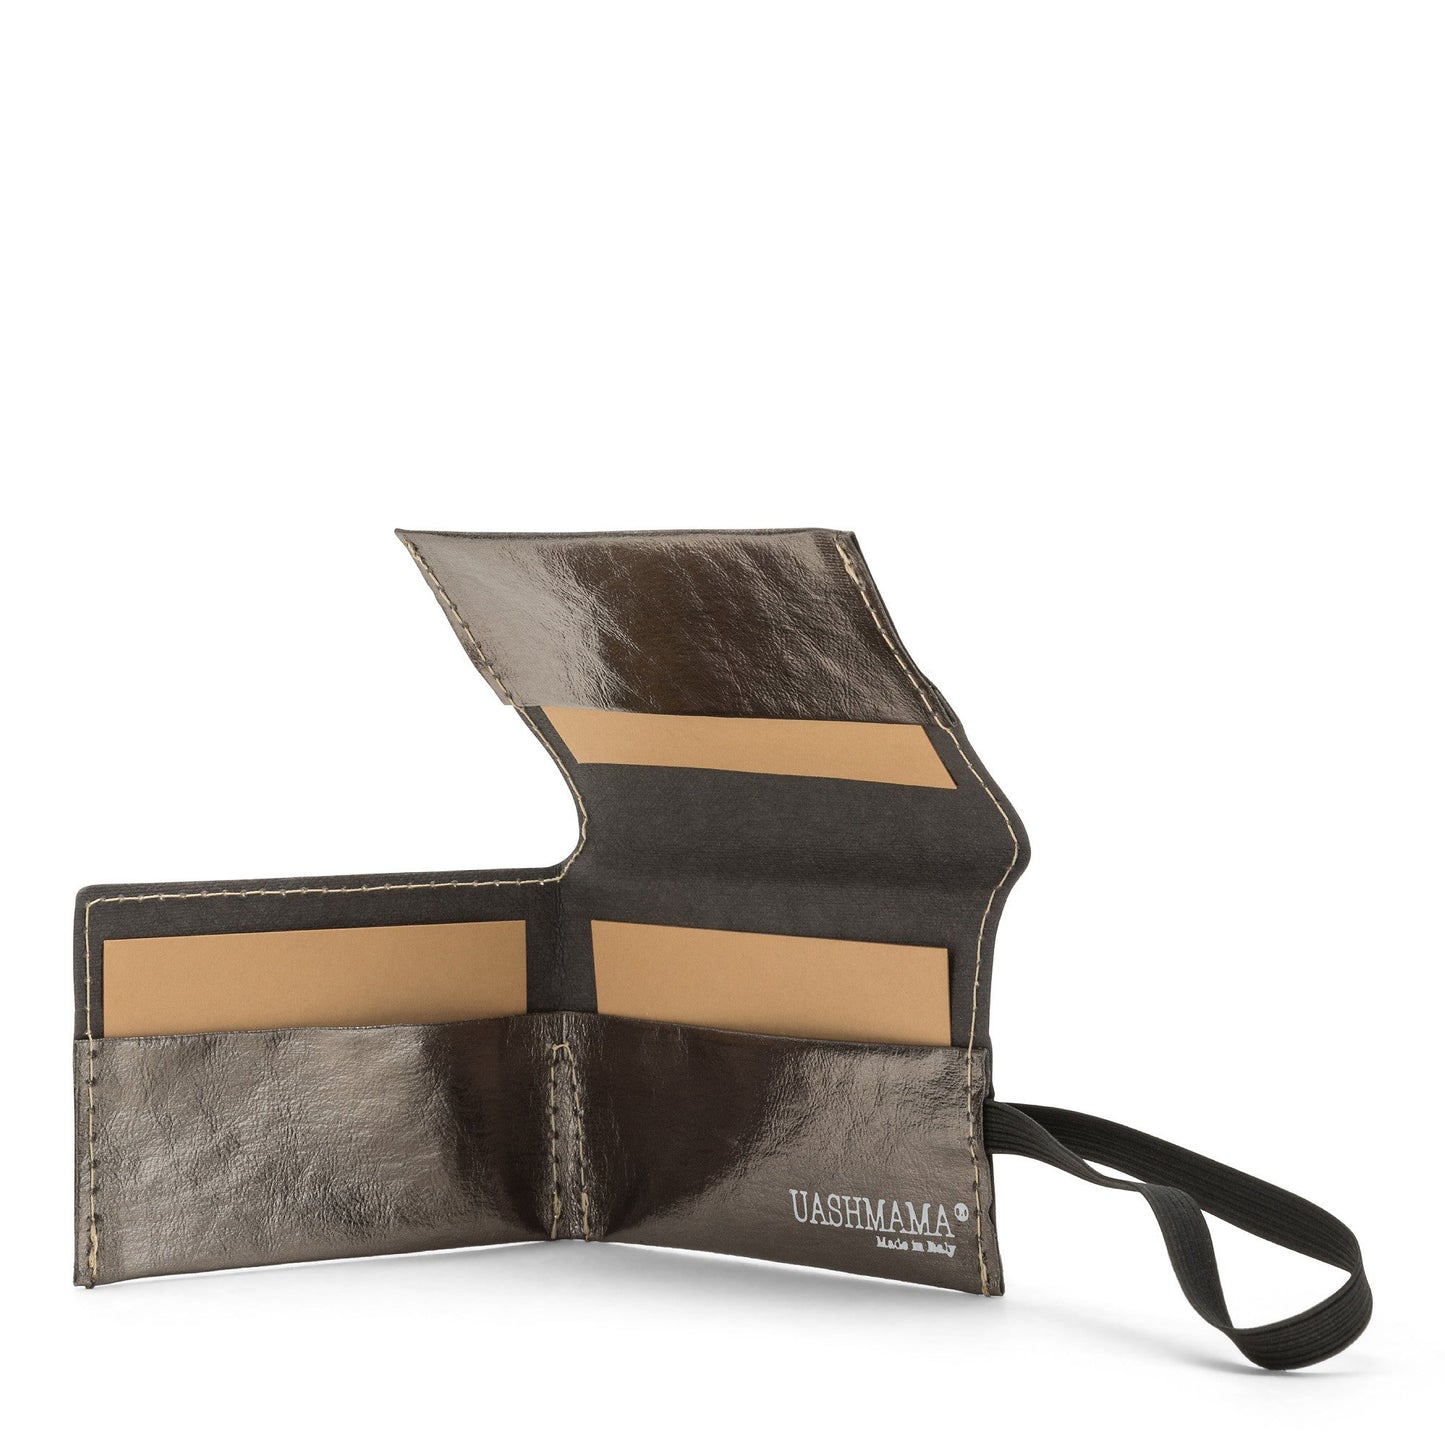 A dark pewter metallic washable paper card holder is shown open from the front angle. It features a black elastic side strap and the white UASHMAMA logo stamped on the inside bottom right.